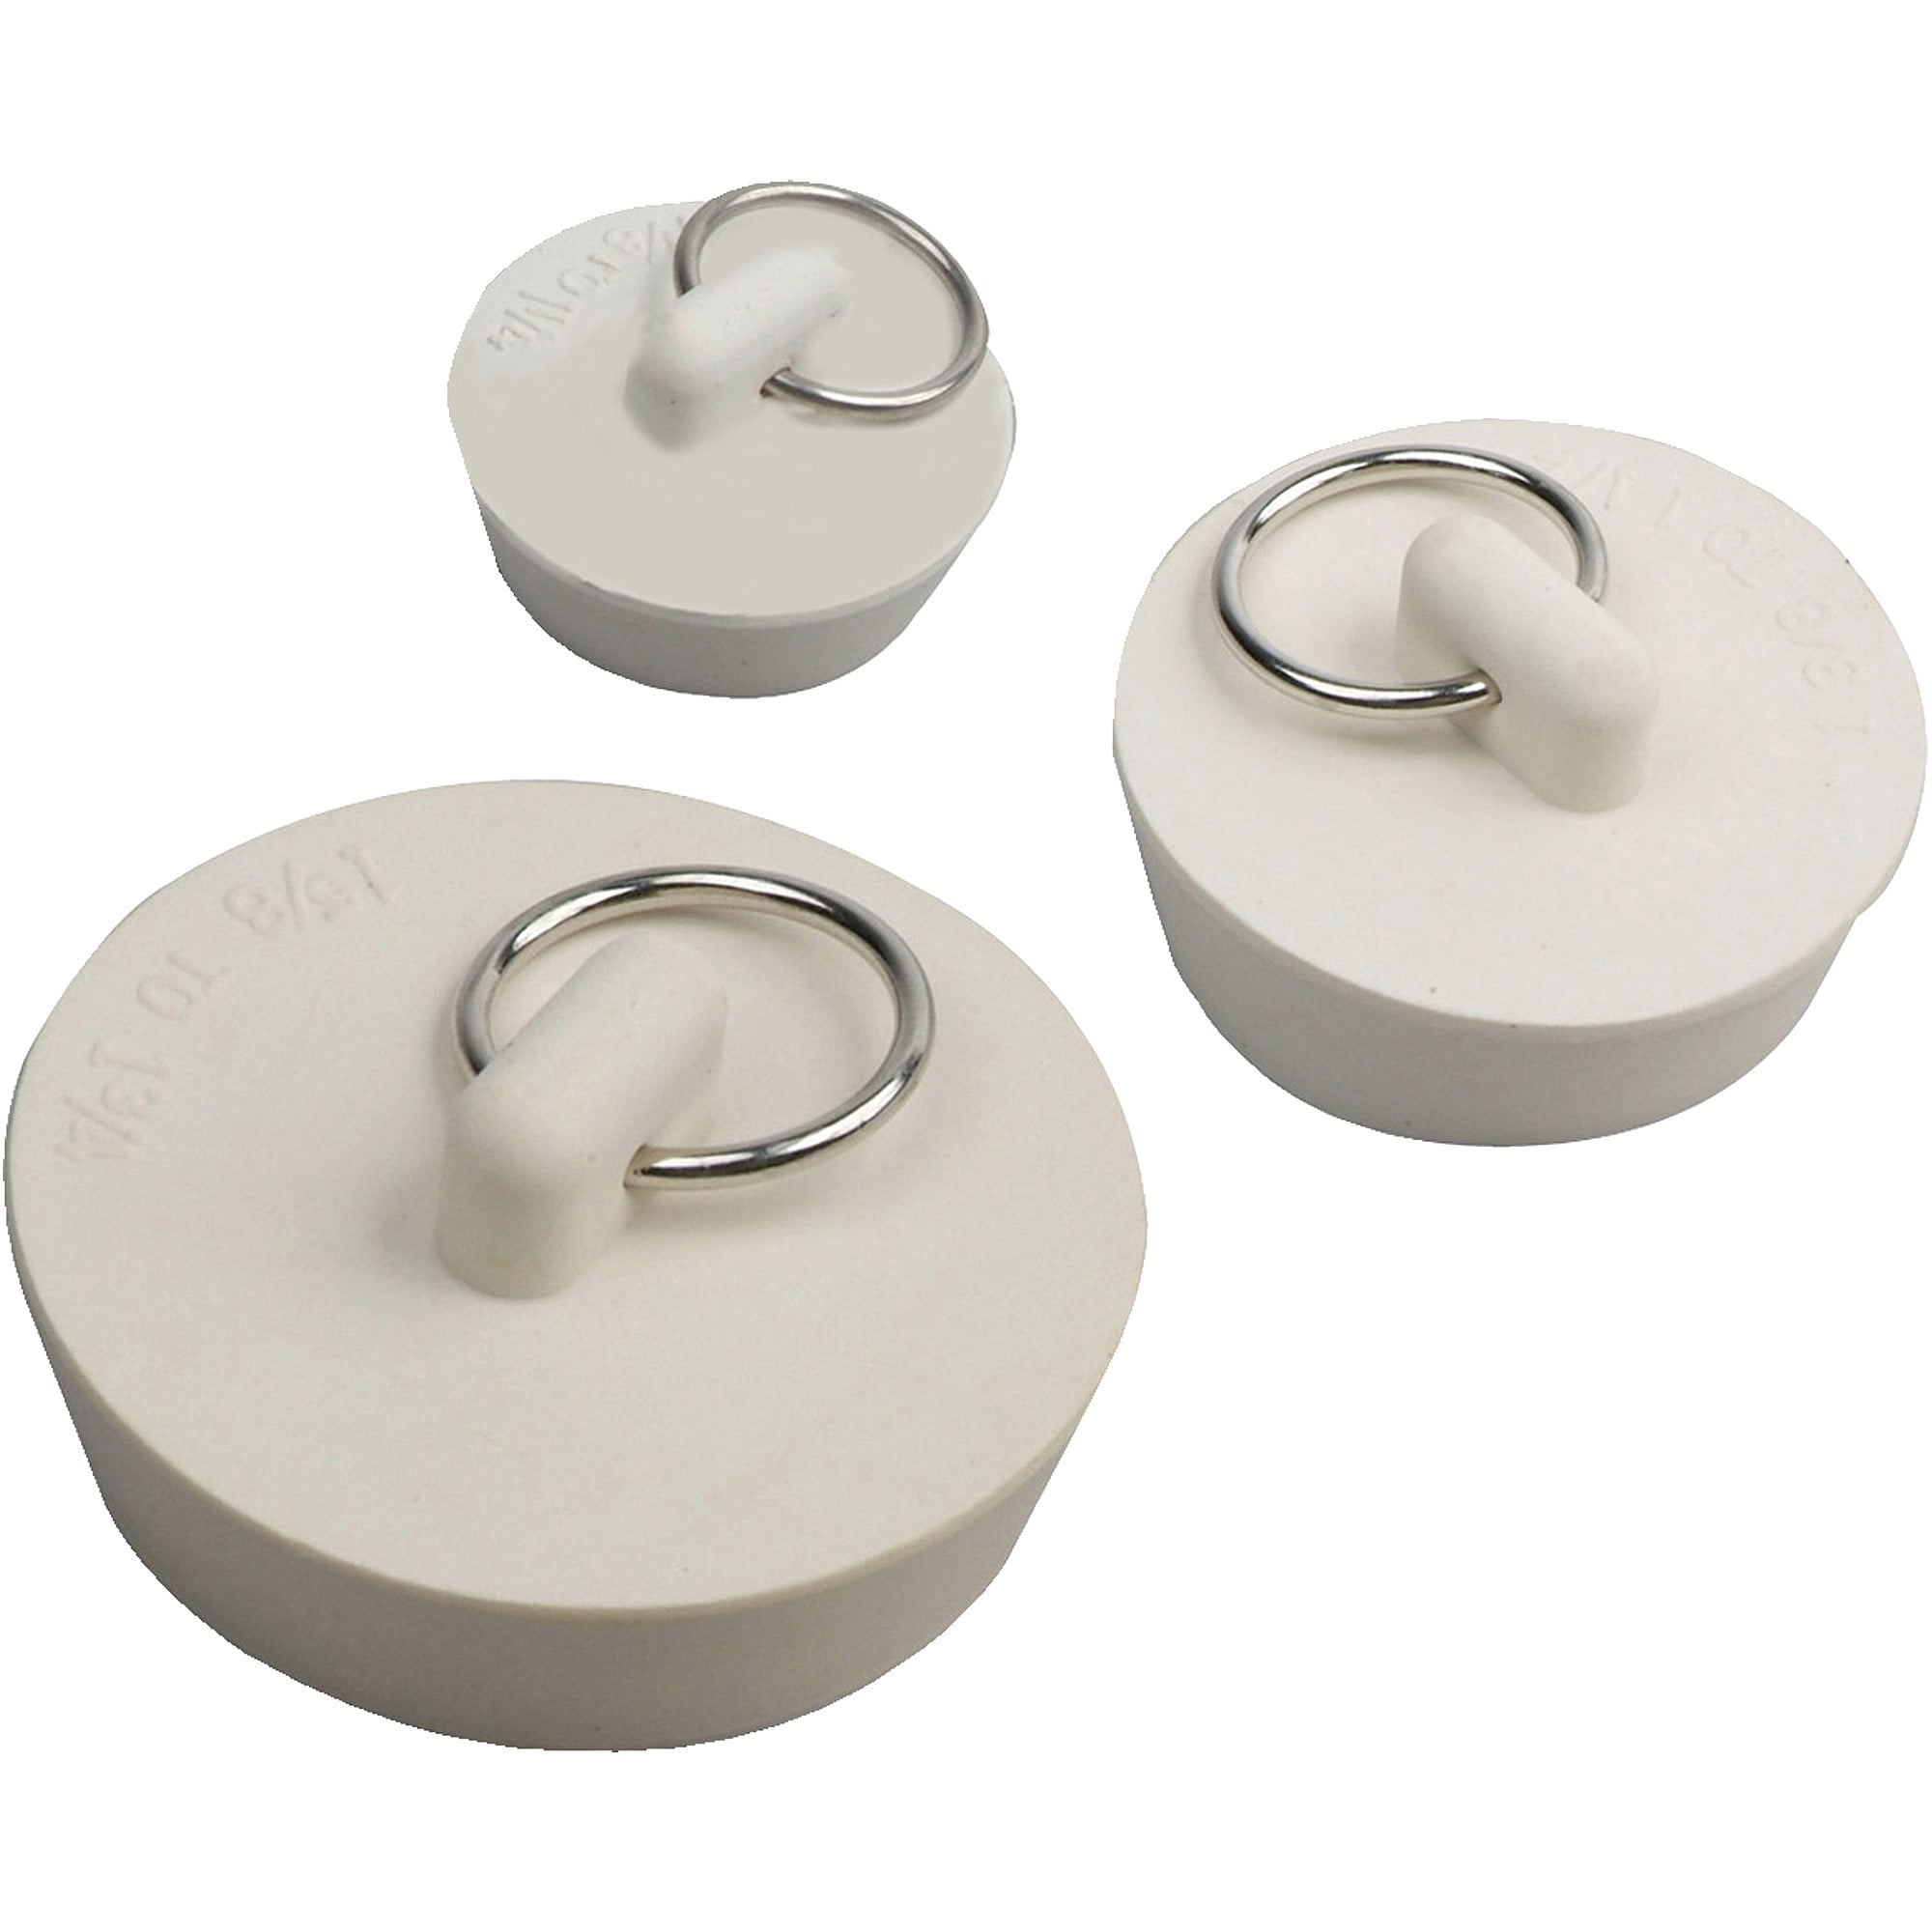 Rless Assorted Rubber Sink Stoppers, 1 1 2 Inch Bathtub Drain